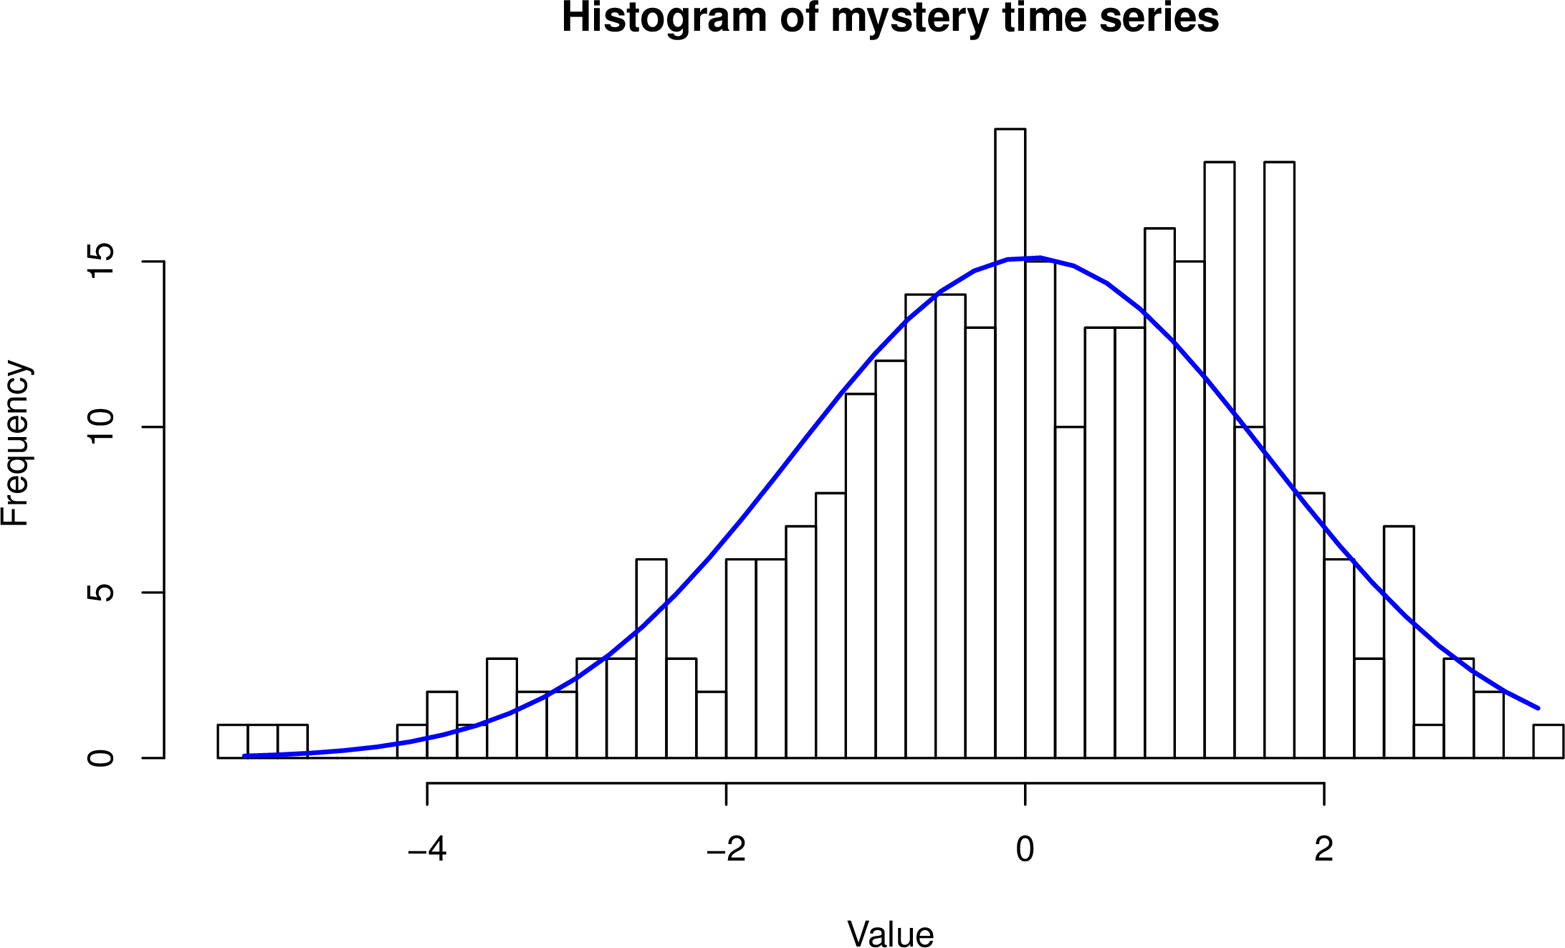 plots/output/statistical_inference/mystery_time_series_histogram.png